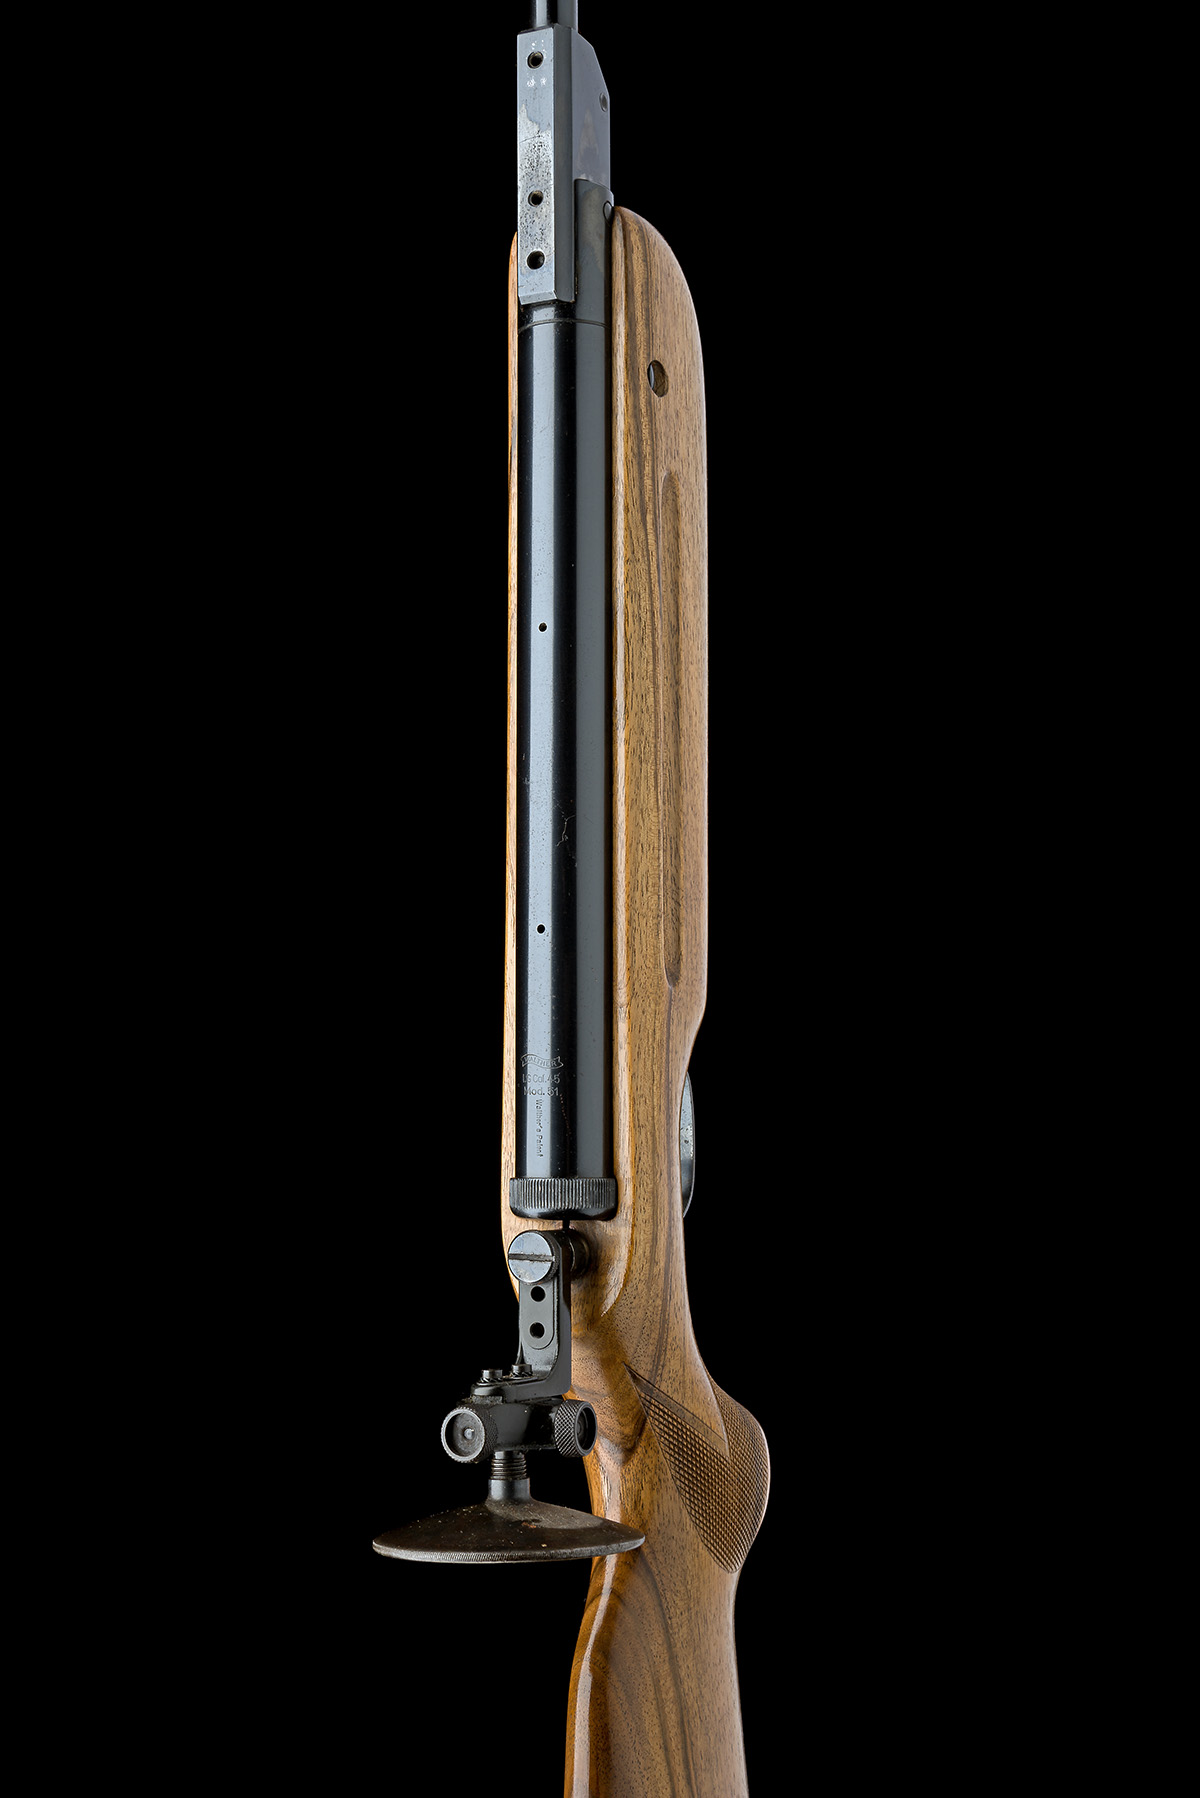 A SCARCE .177 WALTHER LG51 (53'Z') BREAK-BARREL MATCH AIR-RIFLE, serial no. 026654, circa 1960, with - Image 4 of 4